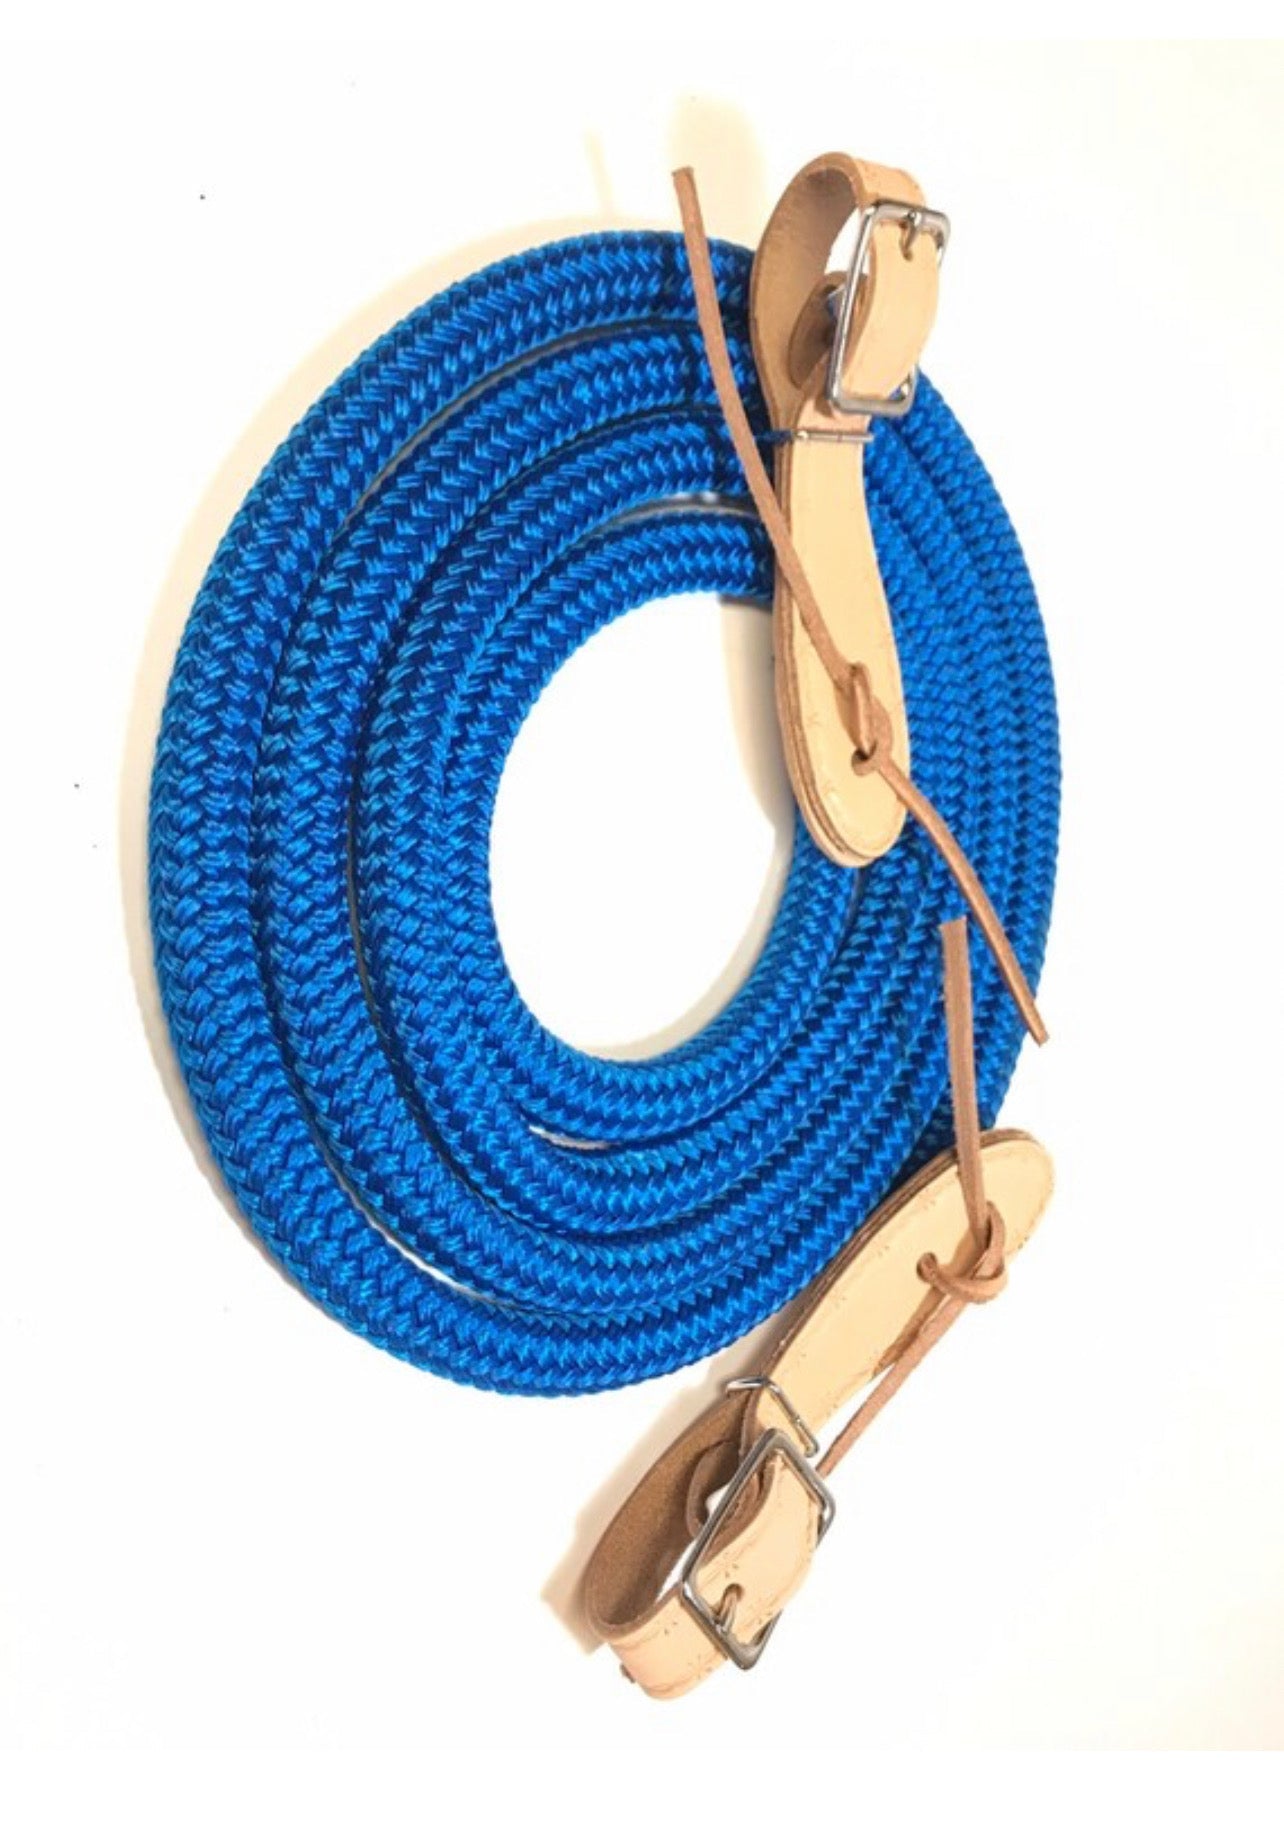 Yacht rope reins with buckle slobber straps 8' – Tiffanys Braided Tack LLC